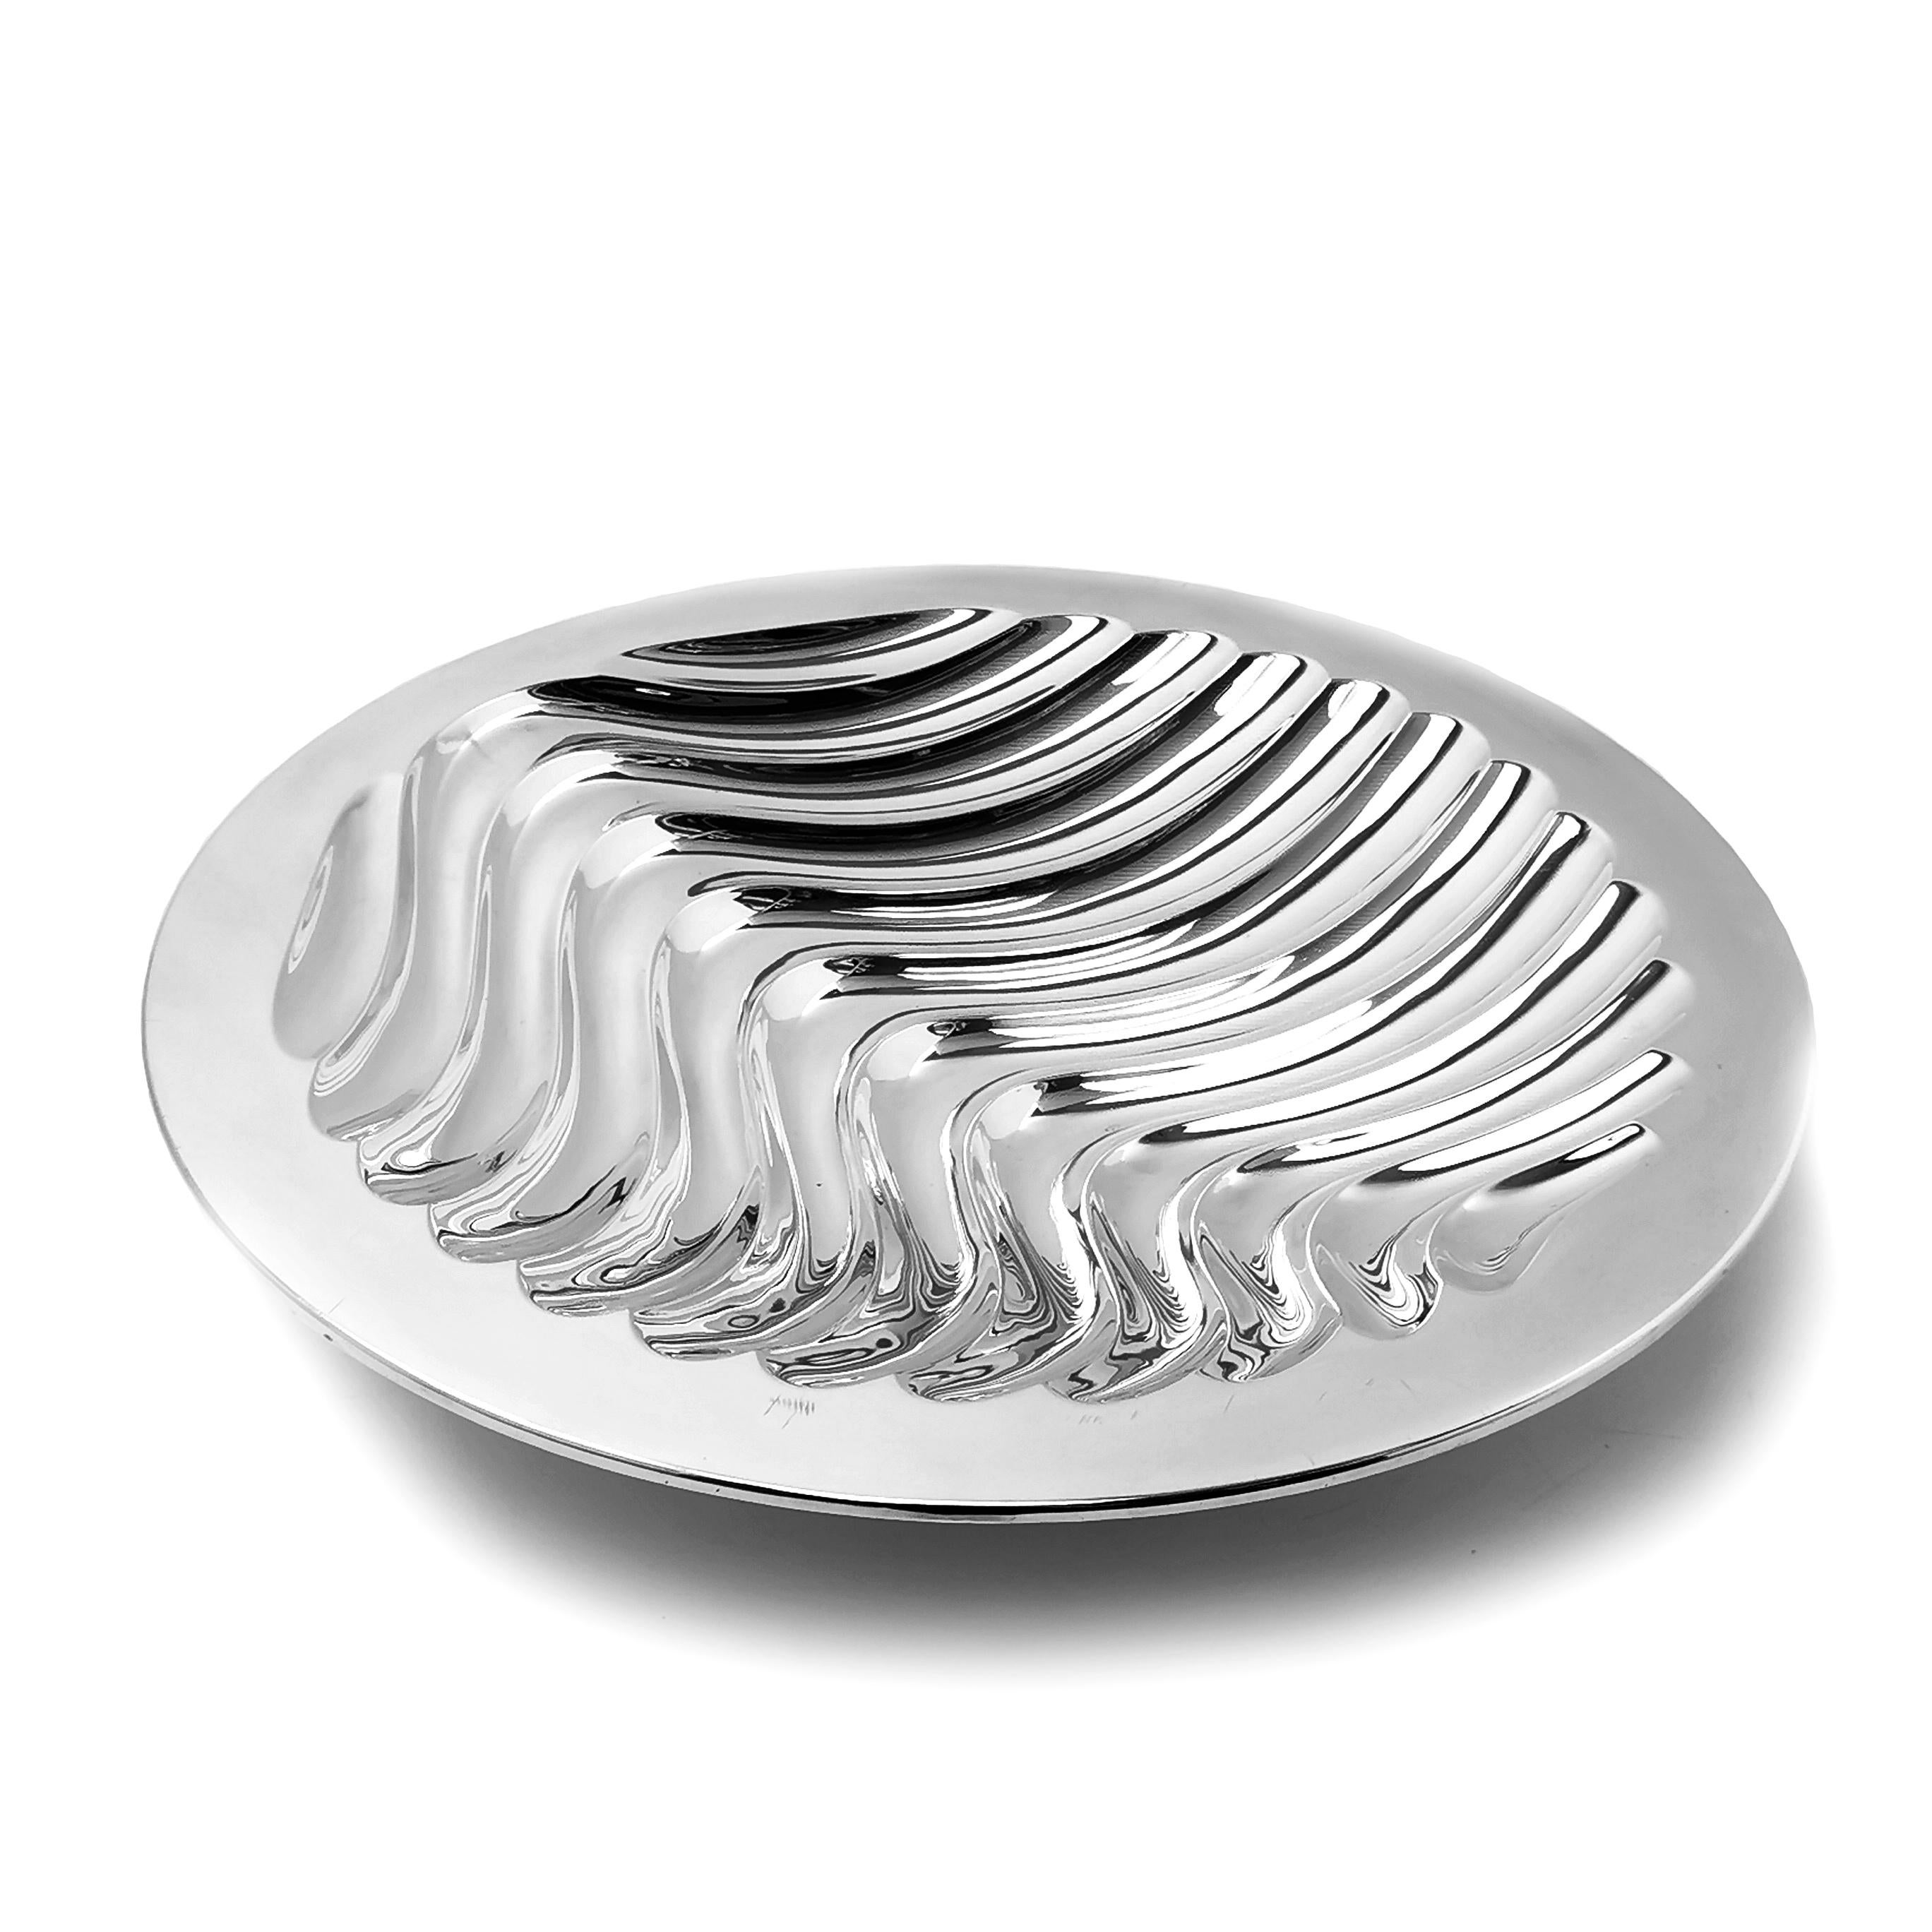 An immensely impressive modern Sterling Silver Bowl by the notable contemporary silversmith Alex Brodgen. This large STerling Silver Bowl is made with a double skinned design and gorgeous almost organic design adapted in a smooth, fluid design in